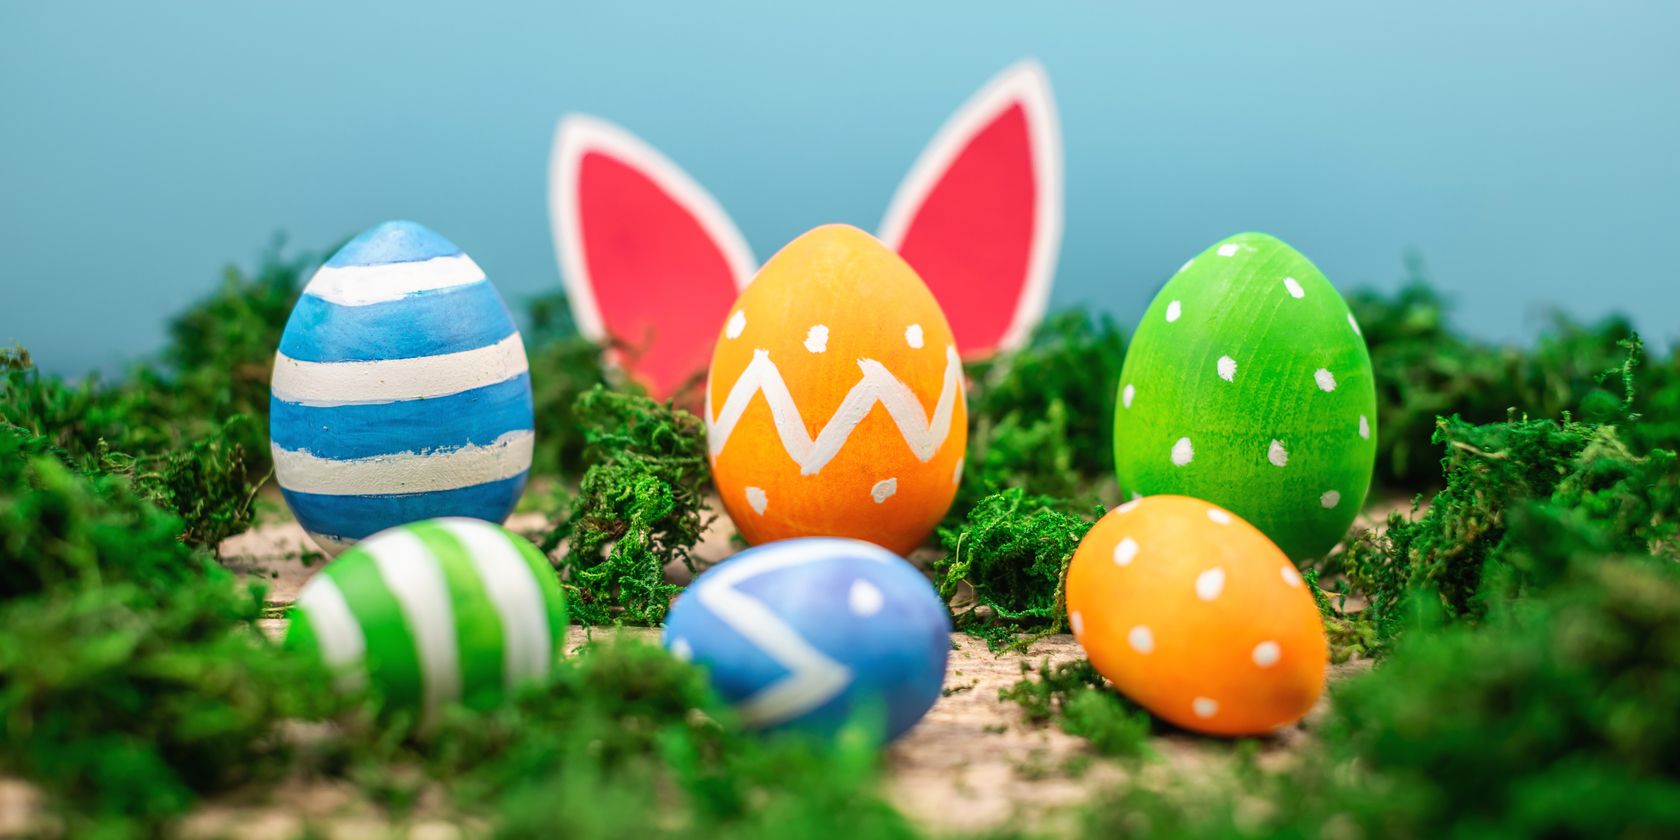 8 Fun Video Game-Related Google Easter Eggs You Must Try